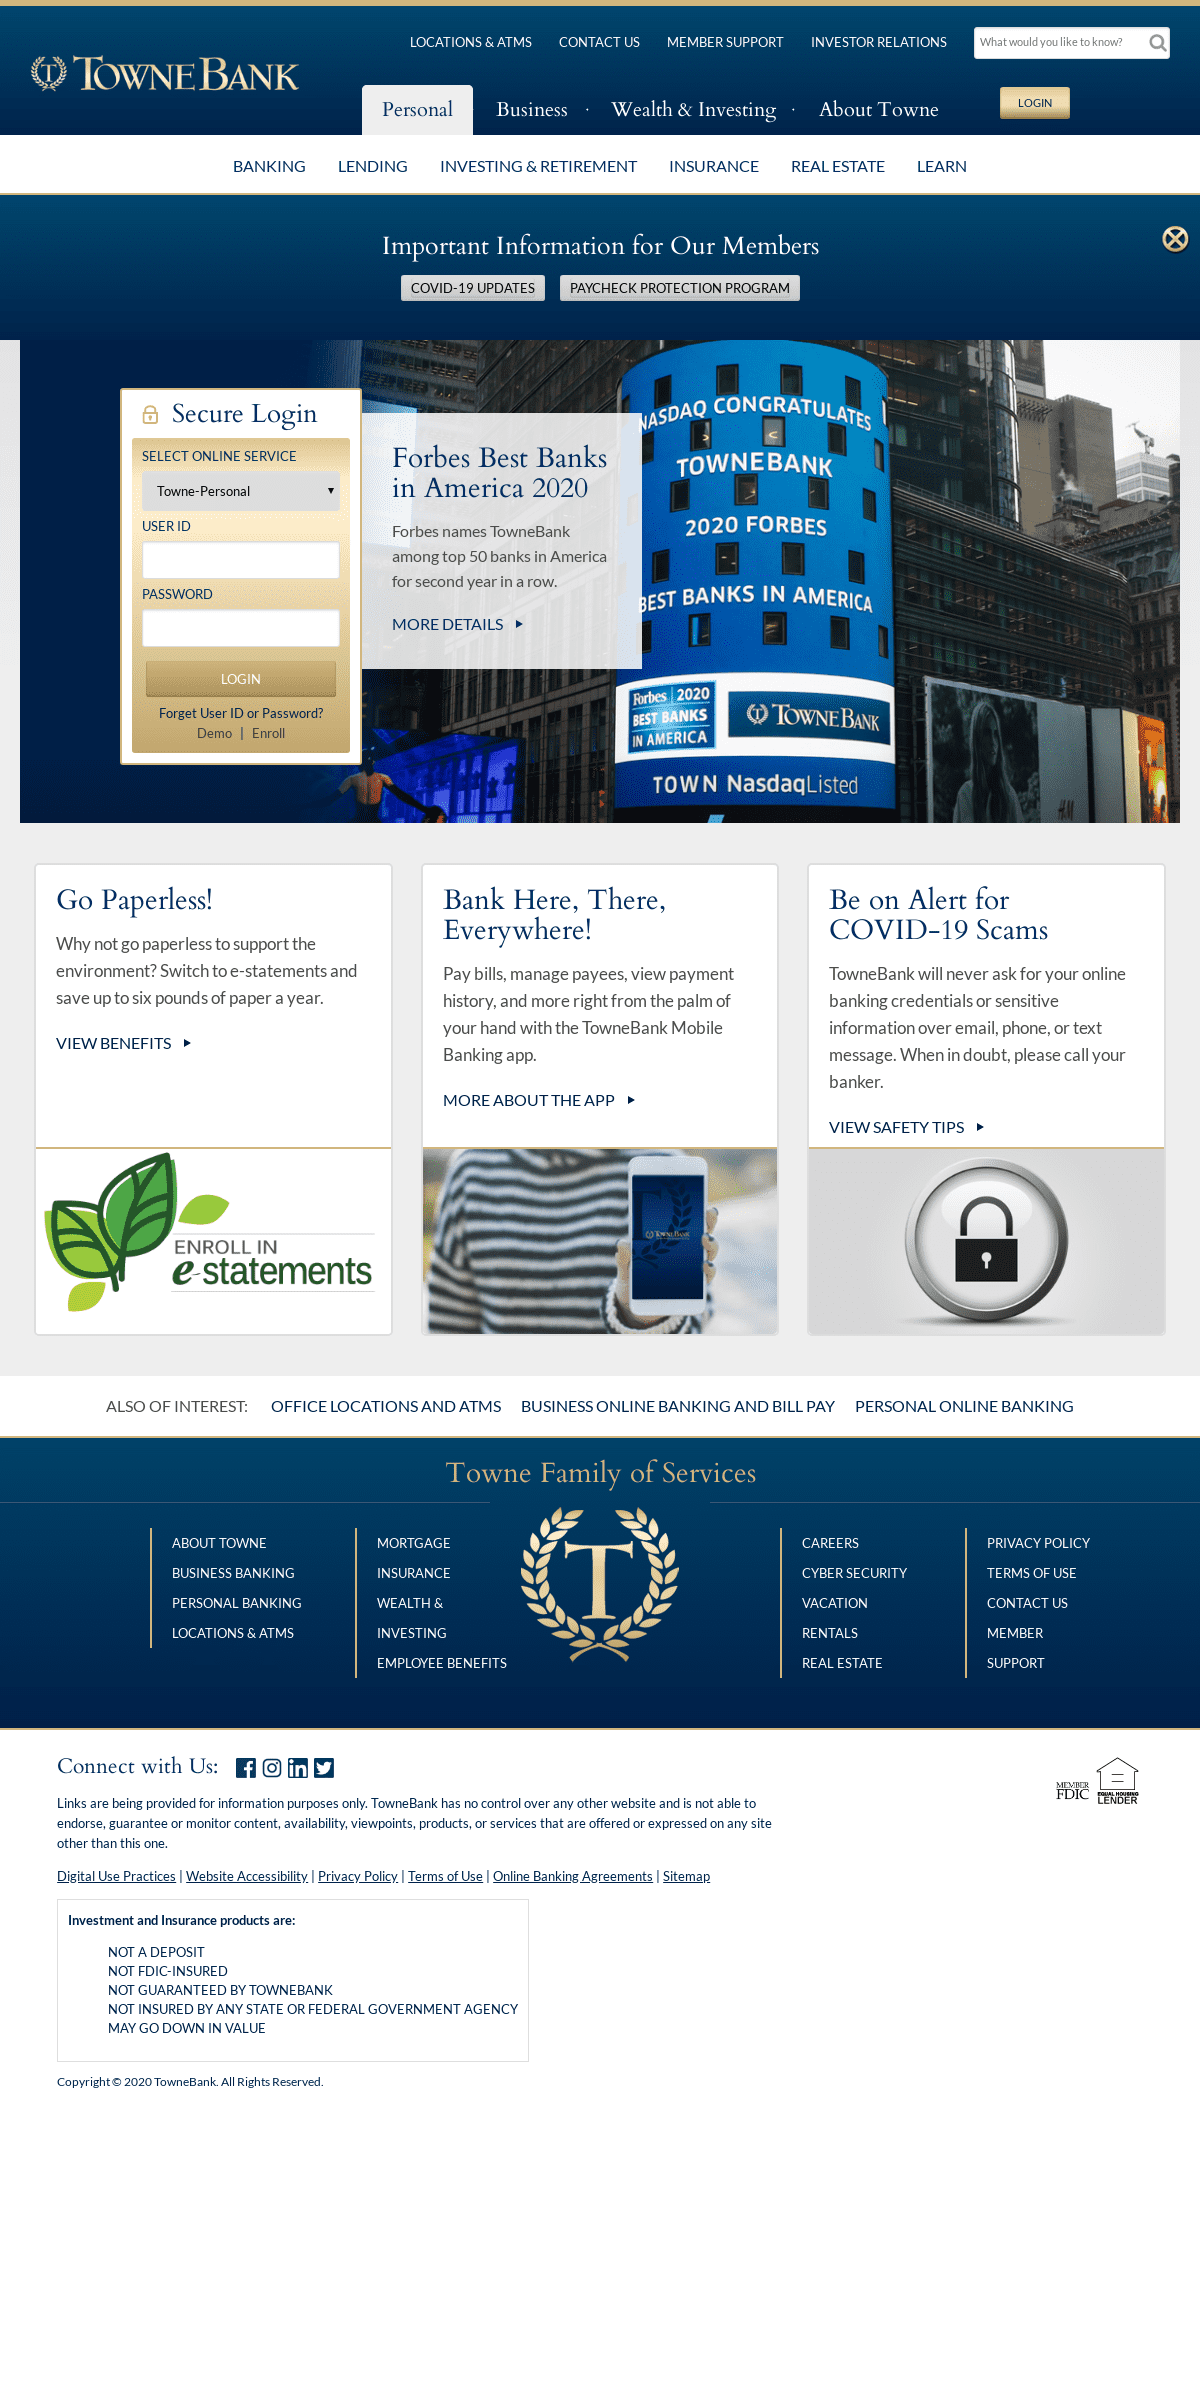 A complete backup of townebank.com